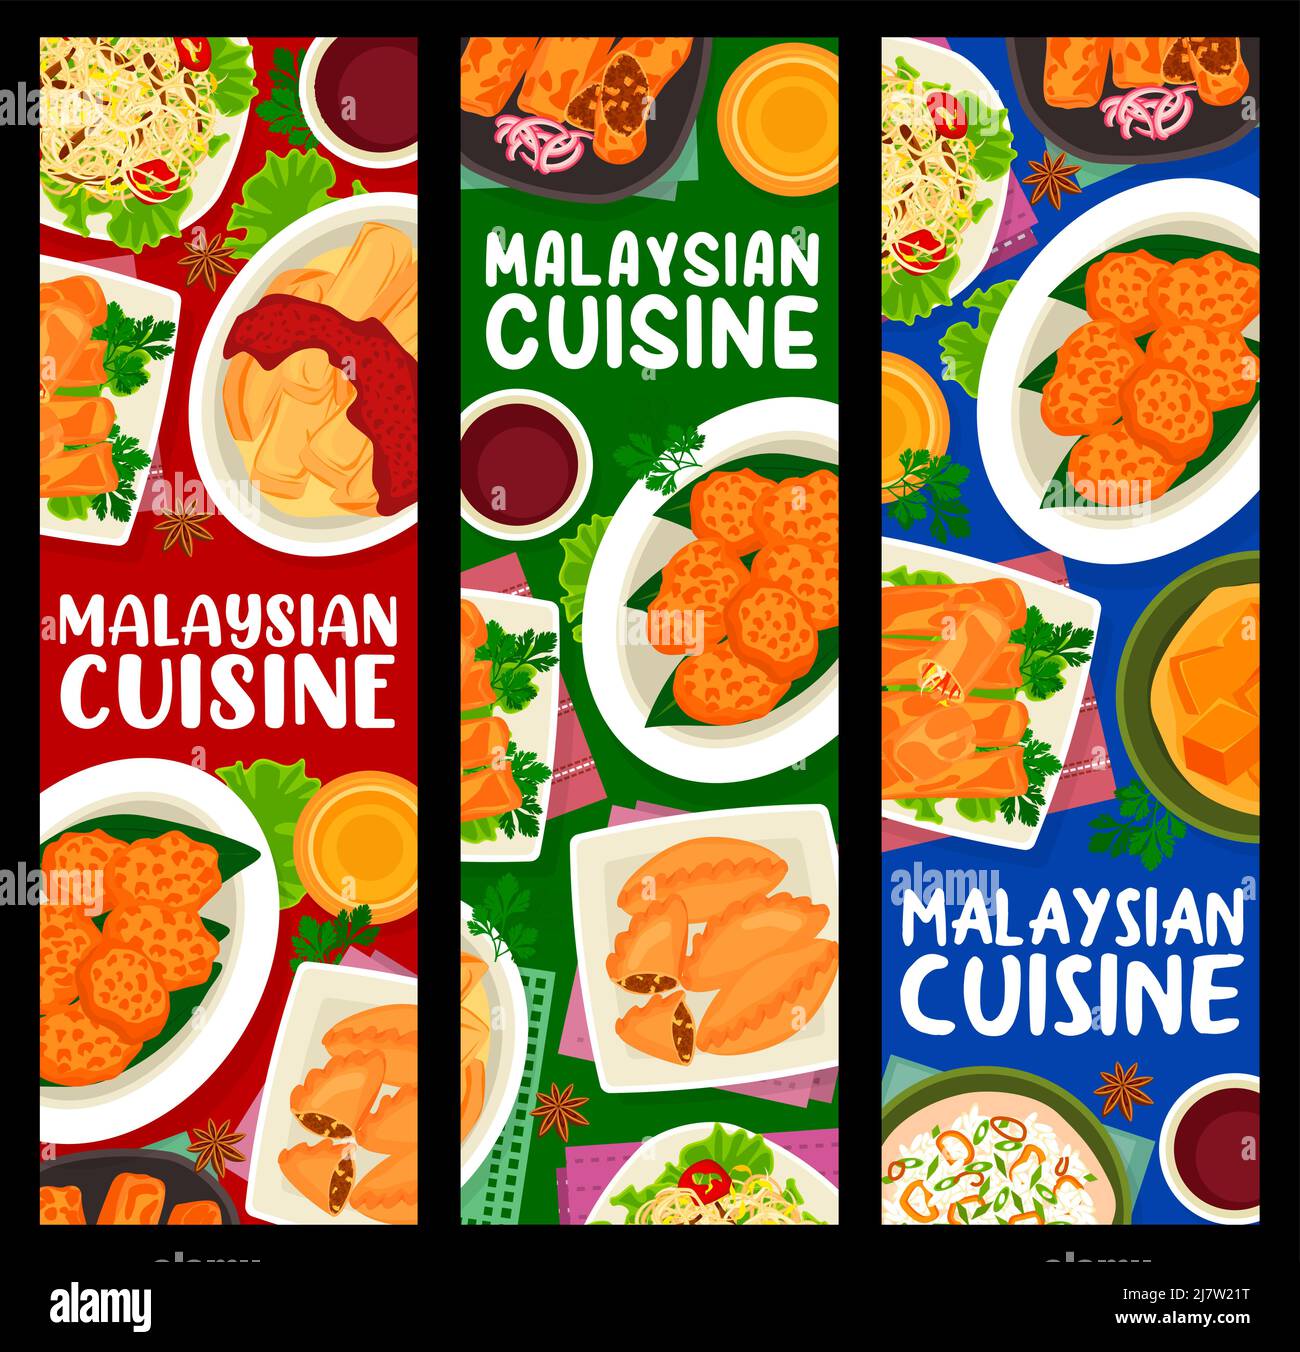 Malaysian cuisine meals banners vector braised bean curd with mushrooms, beef noodle soup, tofu pudding and nasi lemak rice. Prawn noodle soup, banana leaf rice food of Malaysia, exotic asian dishes Stock Vector